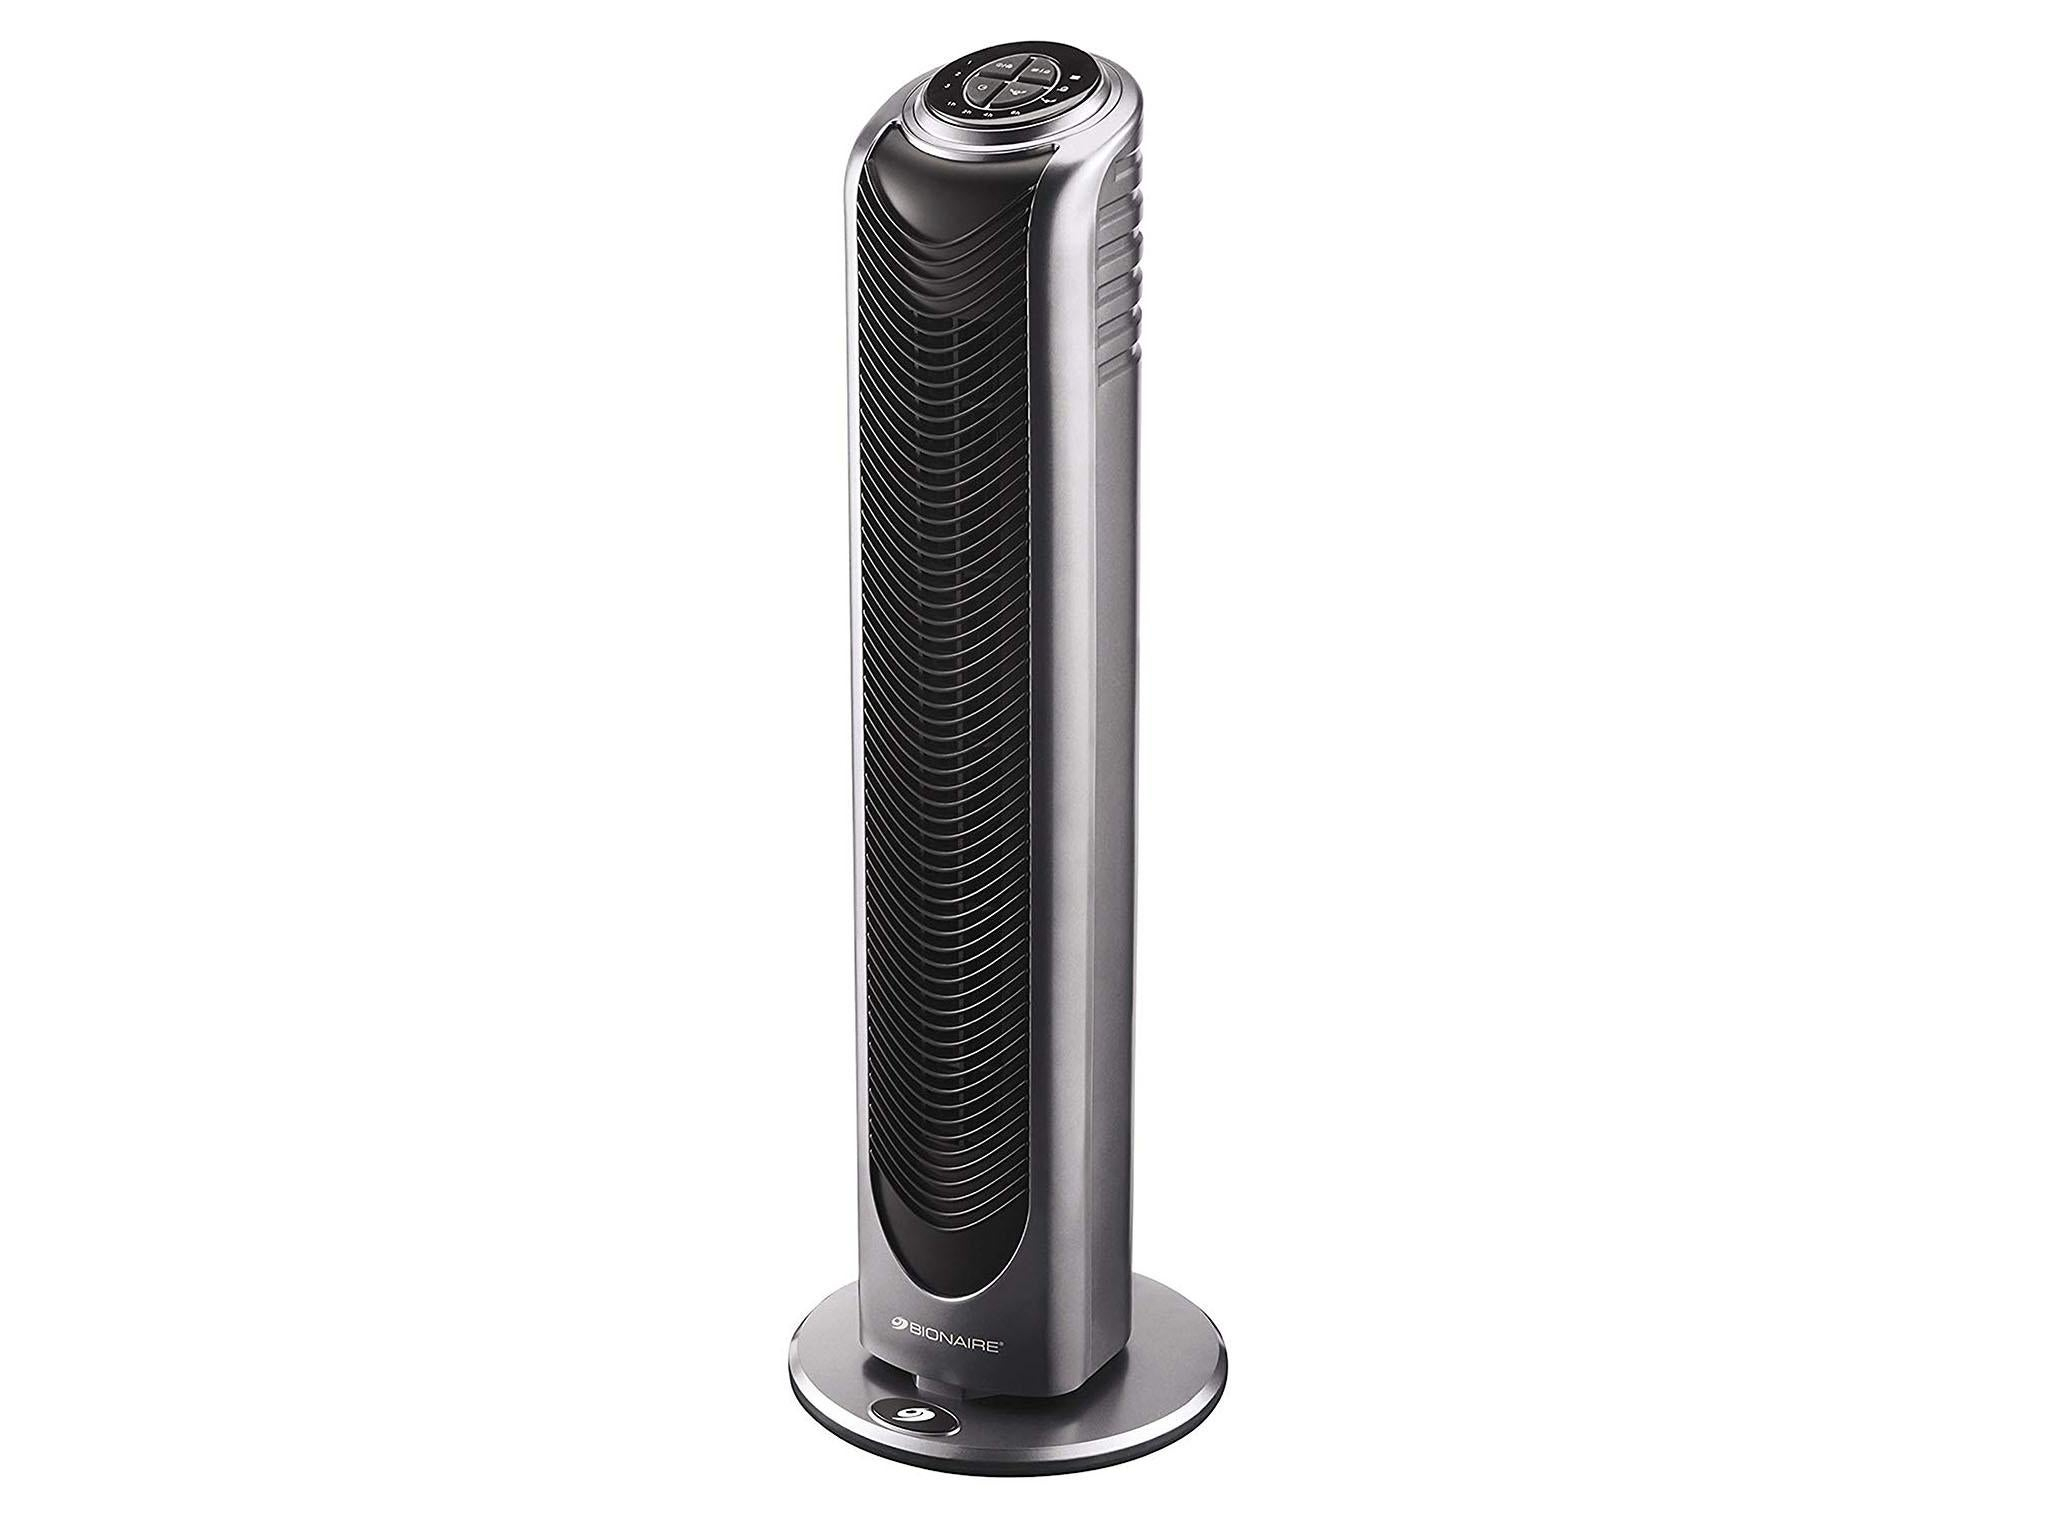 Httpsstaticindependentcouks3fs Publicthumbnailsimage2019060510bionaire Ocillating Tower Fan With Remote Control And Timer in measurements 2048 X 1536